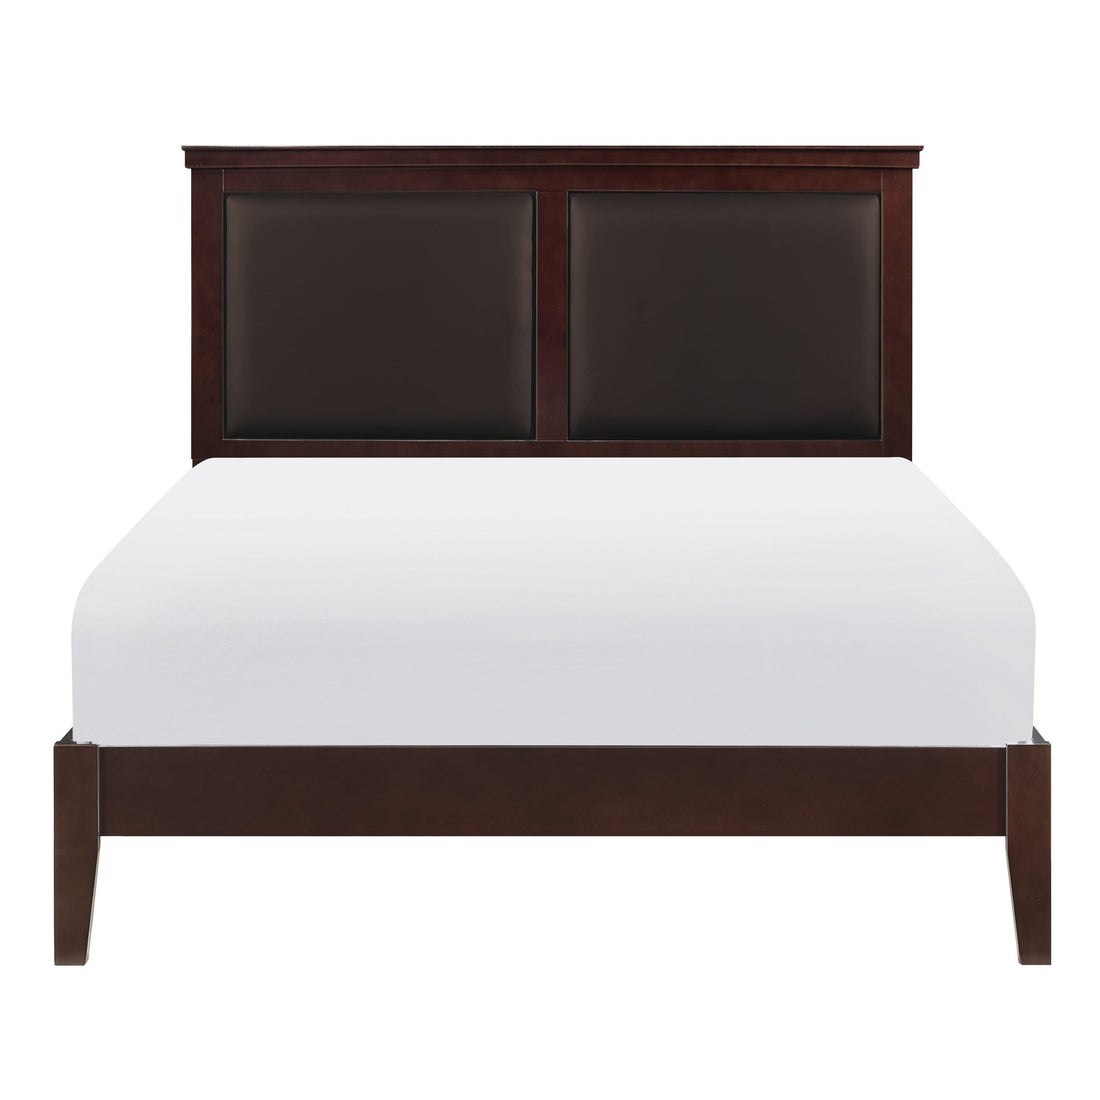 Seabright Cherry Full Panel Bed - SET | 1519CHF-1 | 1519CHT-3 - Bien Home Furniture &amp; Electronics